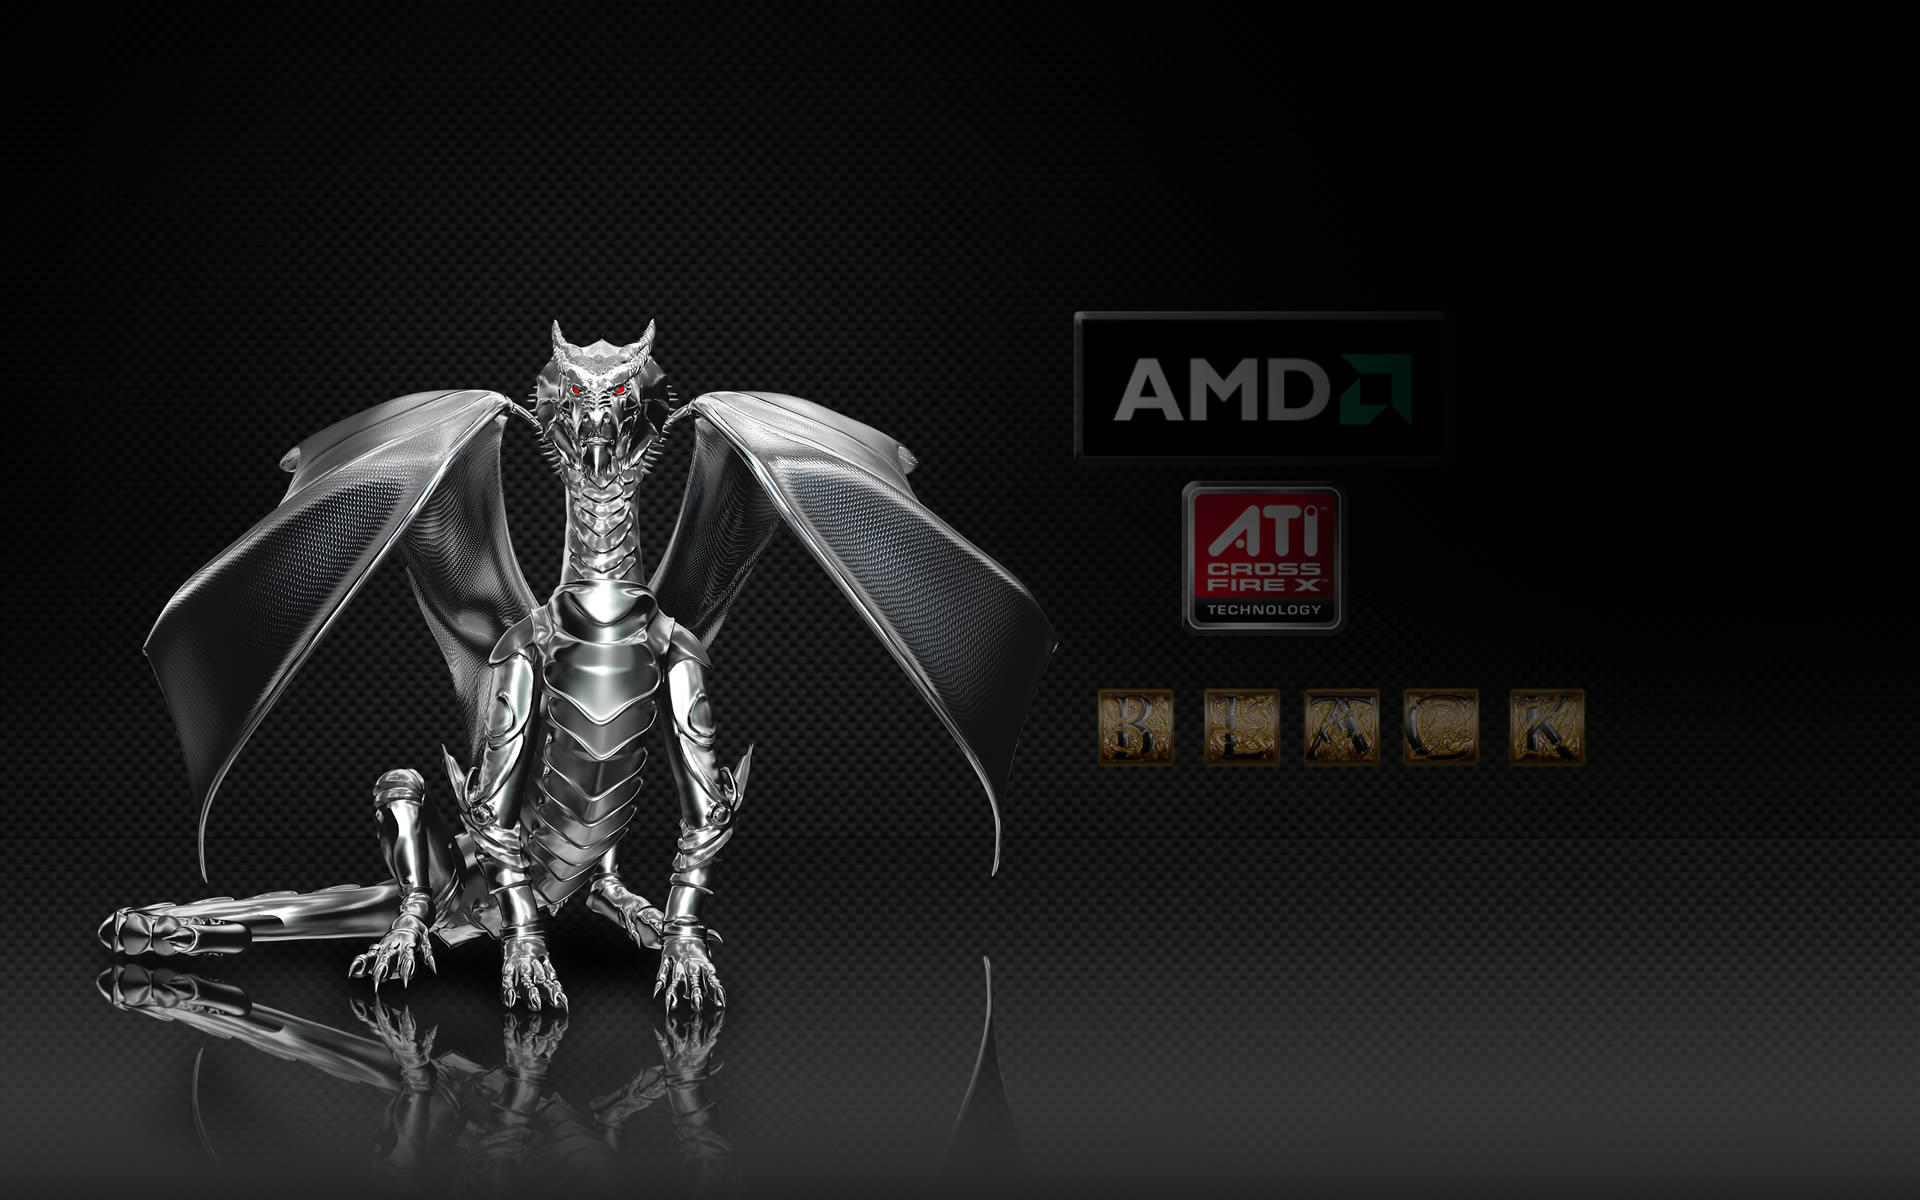 Free Download Pics Photos Amd Dragon Fusion Logo Wallpaper Android 19x10 For Your Desktop Mobile Tablet Explore 77 Amd Wallpaper Amd Wallpaper 19x1080 Double Monitor Wallpaper Multi Monitor Wallpaper